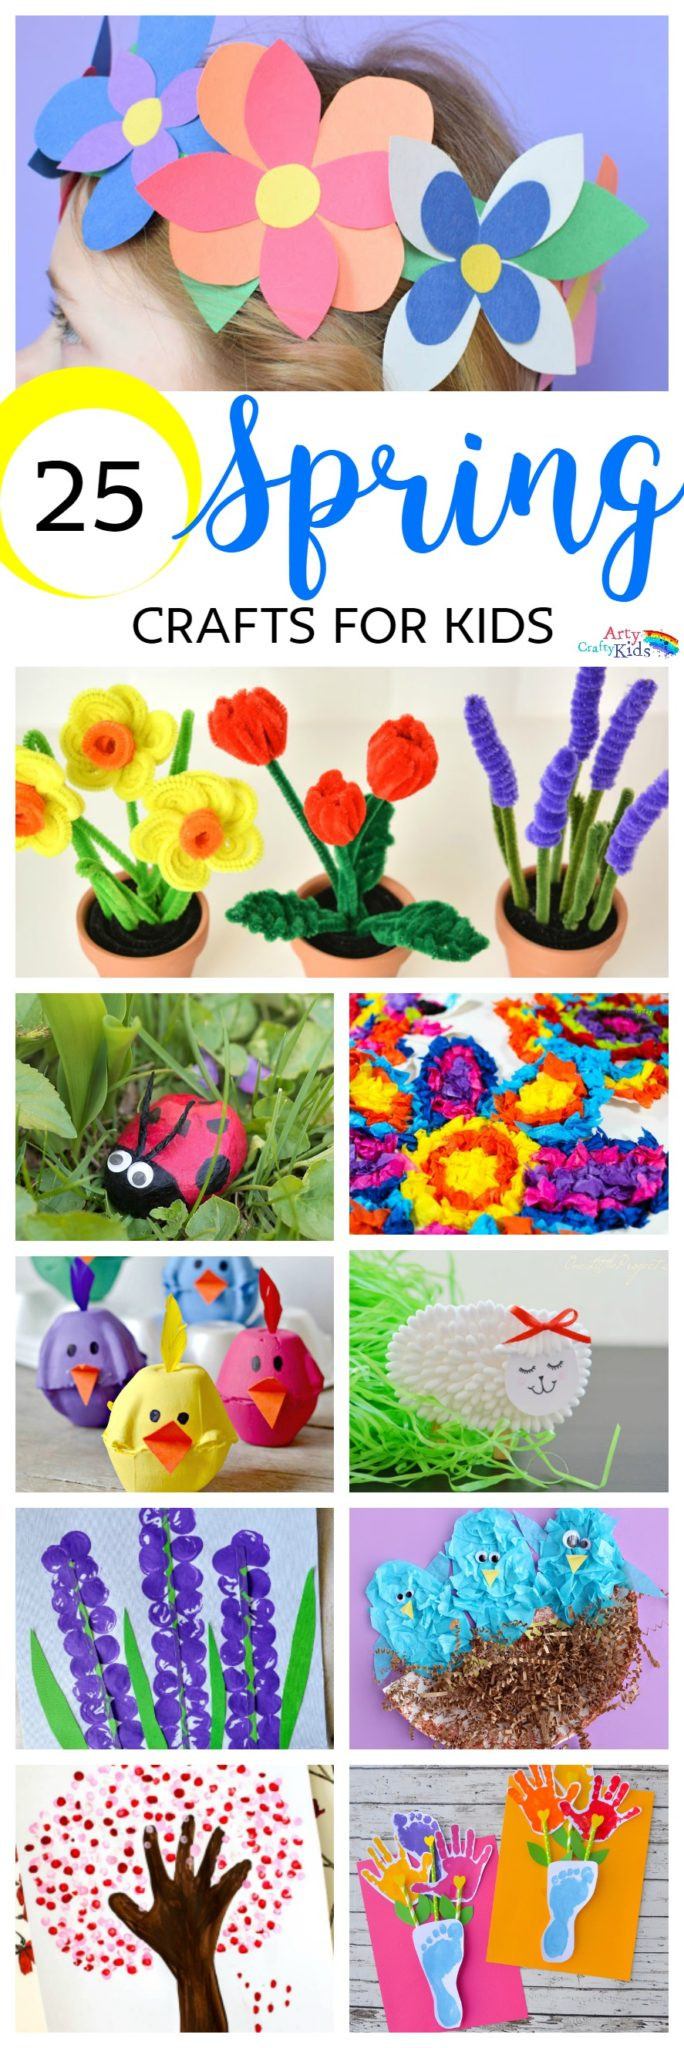 Spring Ideas For Kids
 Easy Spring Crafts for Kids Arty Crafty Kids